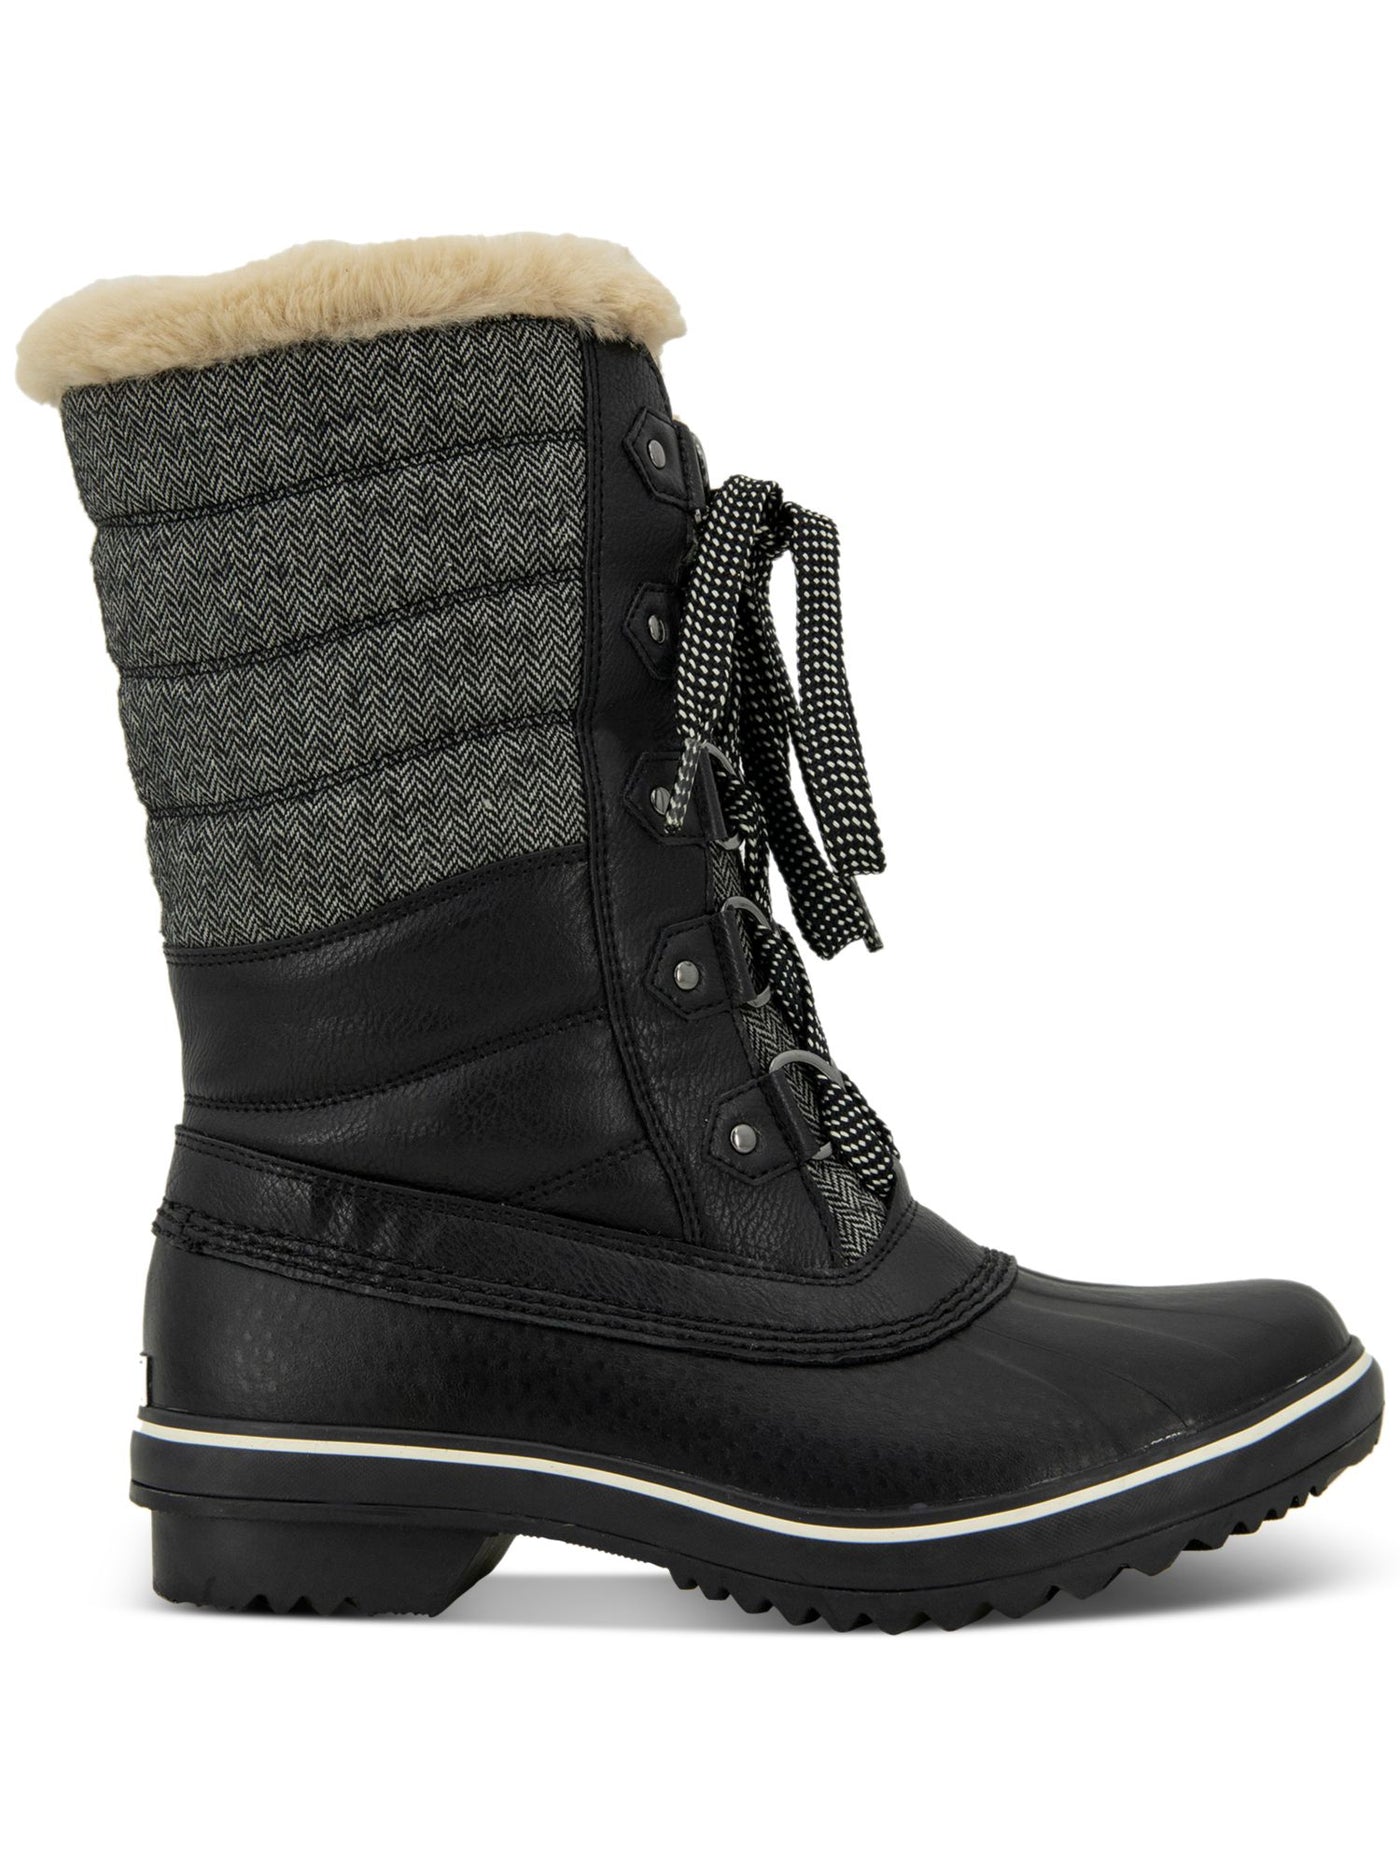 JBU BY JAMBU Womens Black Water Resistant Quilted Siberia Round Toe Lace-Up Winter 7 M